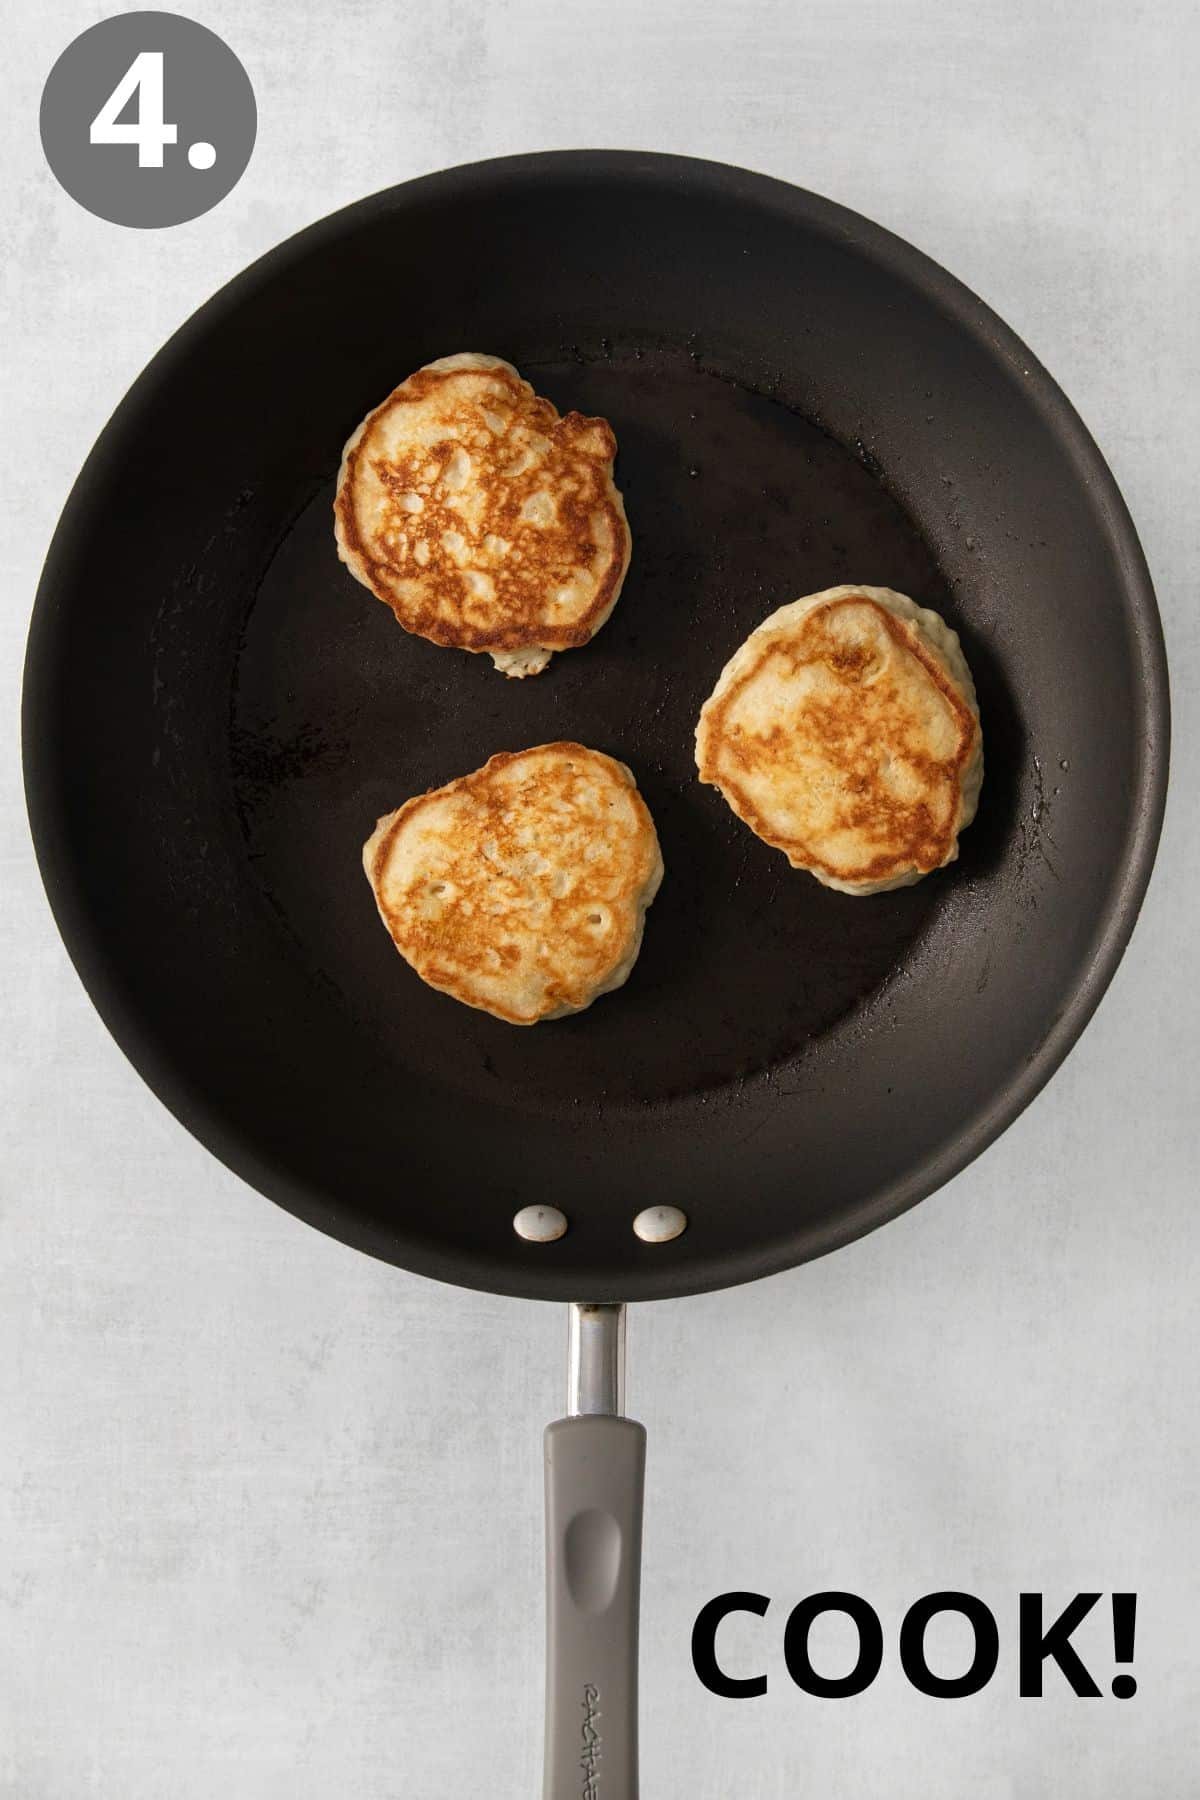 Gluten-free banana pancakes cooking in a skillet